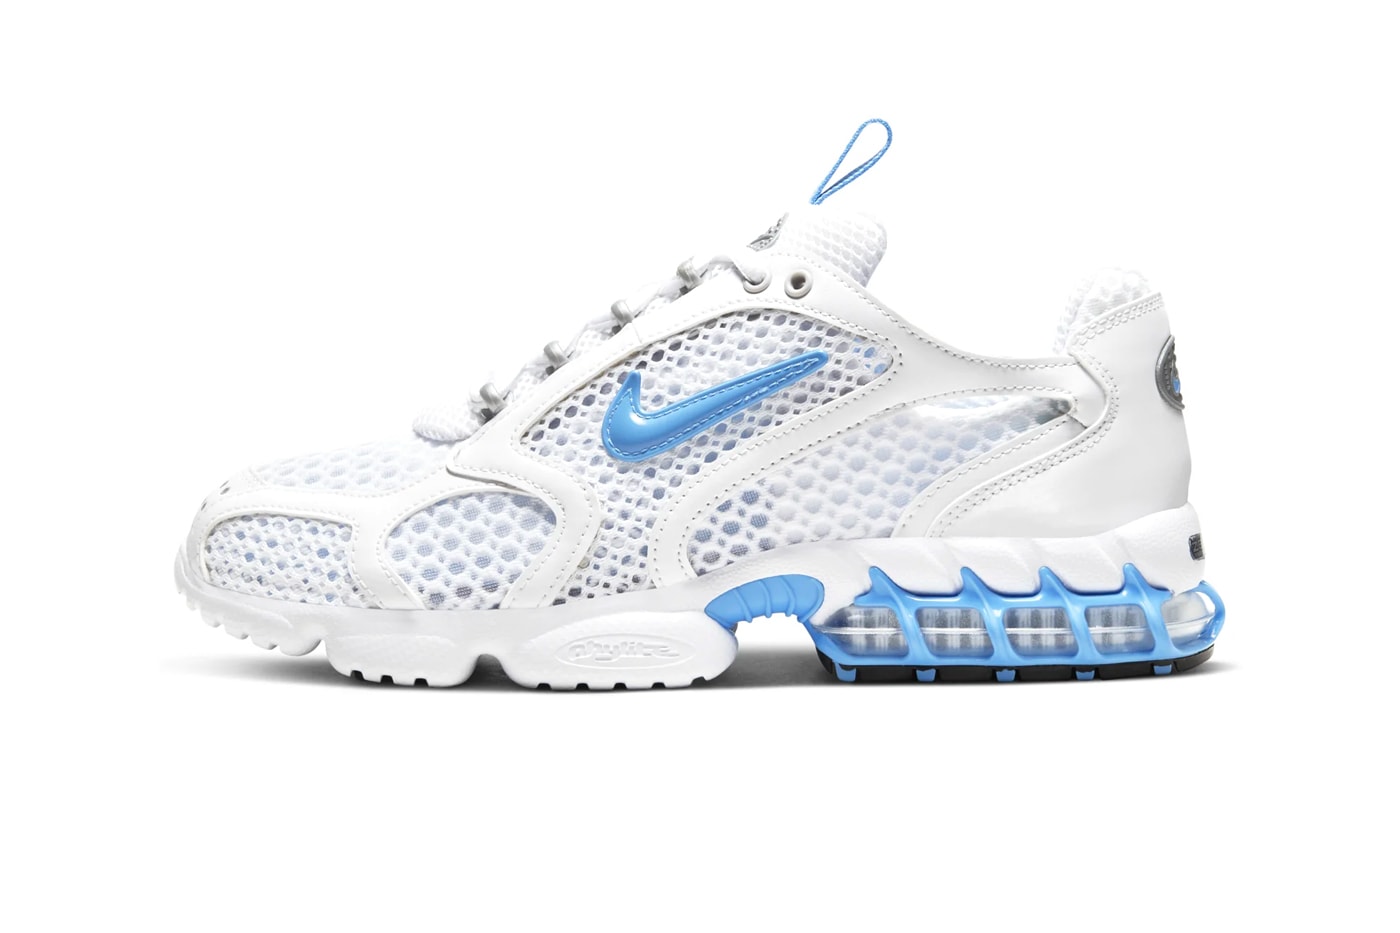 Nike Air Zoom Spiridon Cage 2 University Blue Sneakers Release Info 